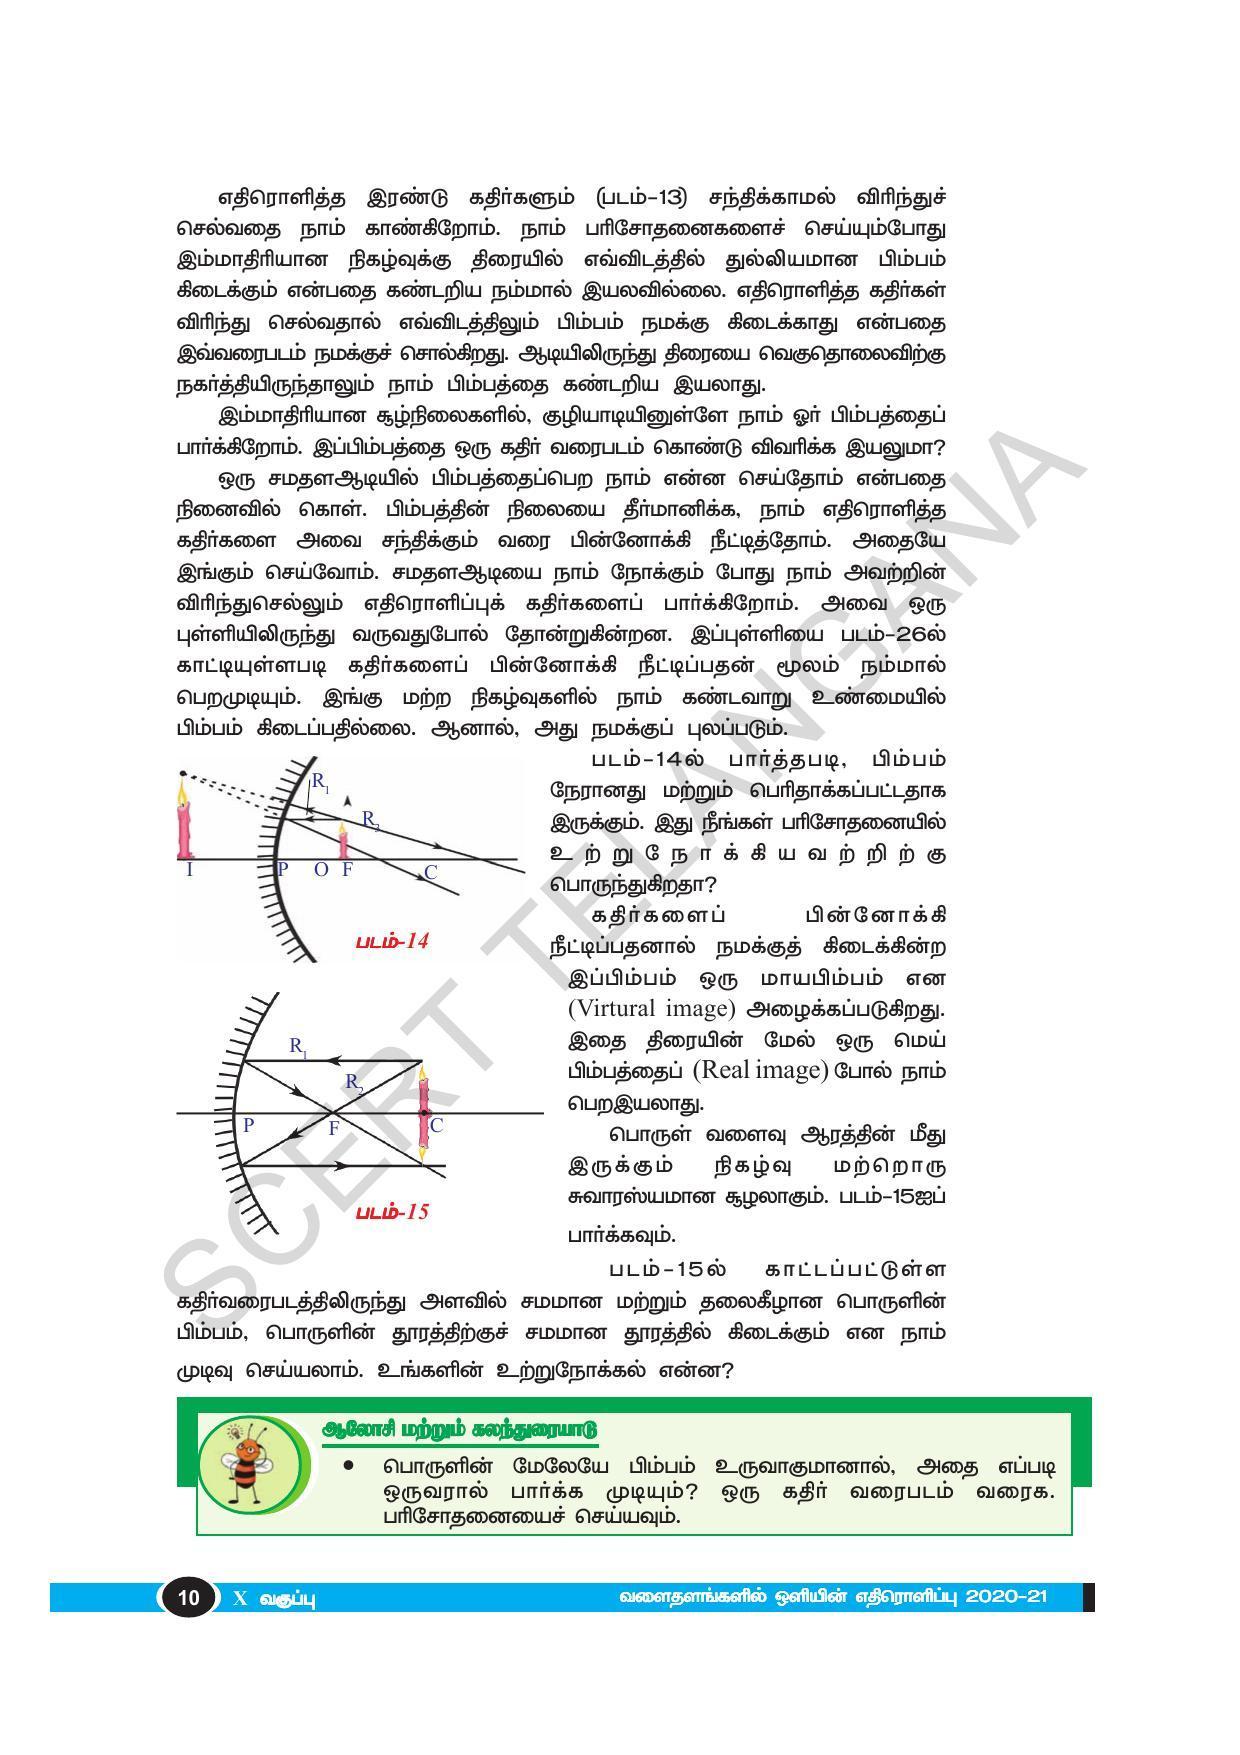 TS SCERT Class 10 Physical Science(Tamil Medium) Text Book - Page 22